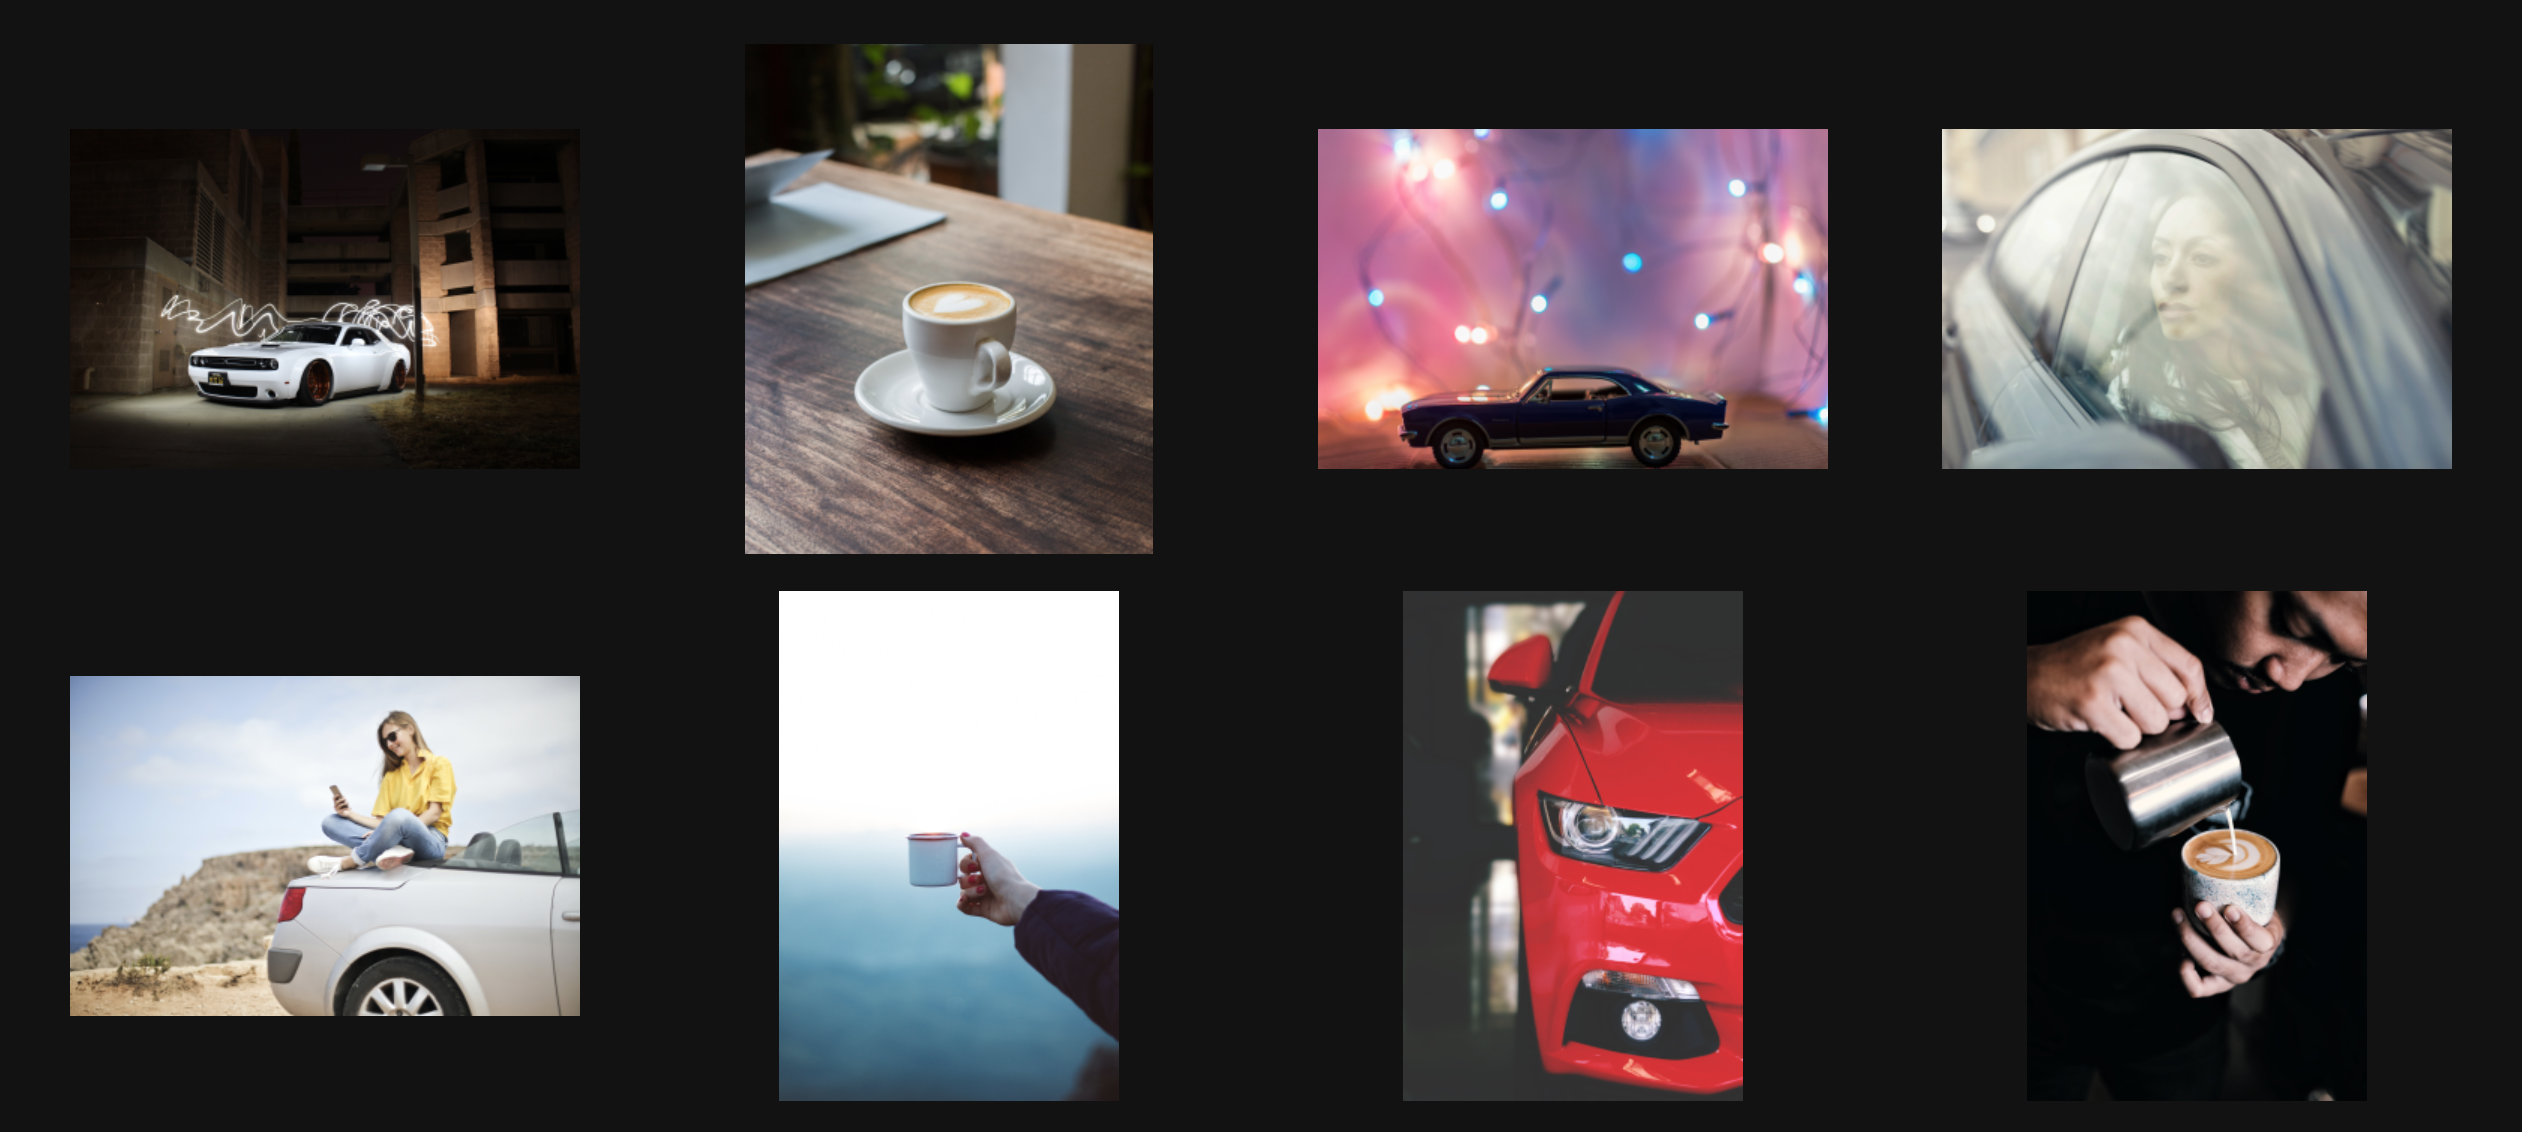 Car or coffee demo dataset sample images